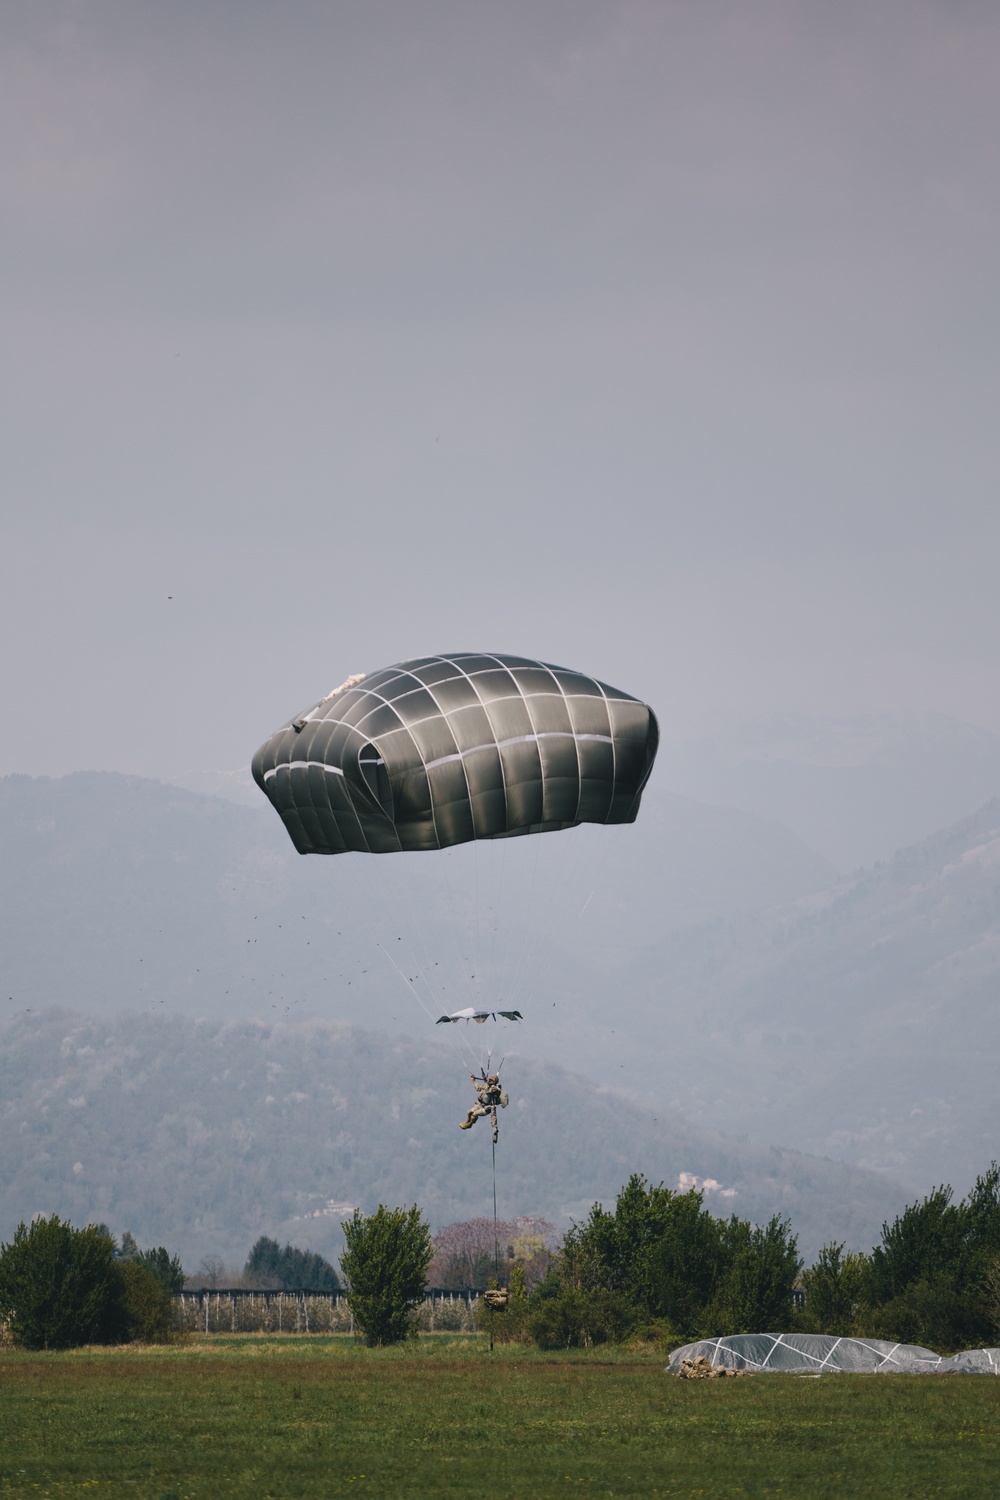 U.S. Army paratrooper descends from the sky